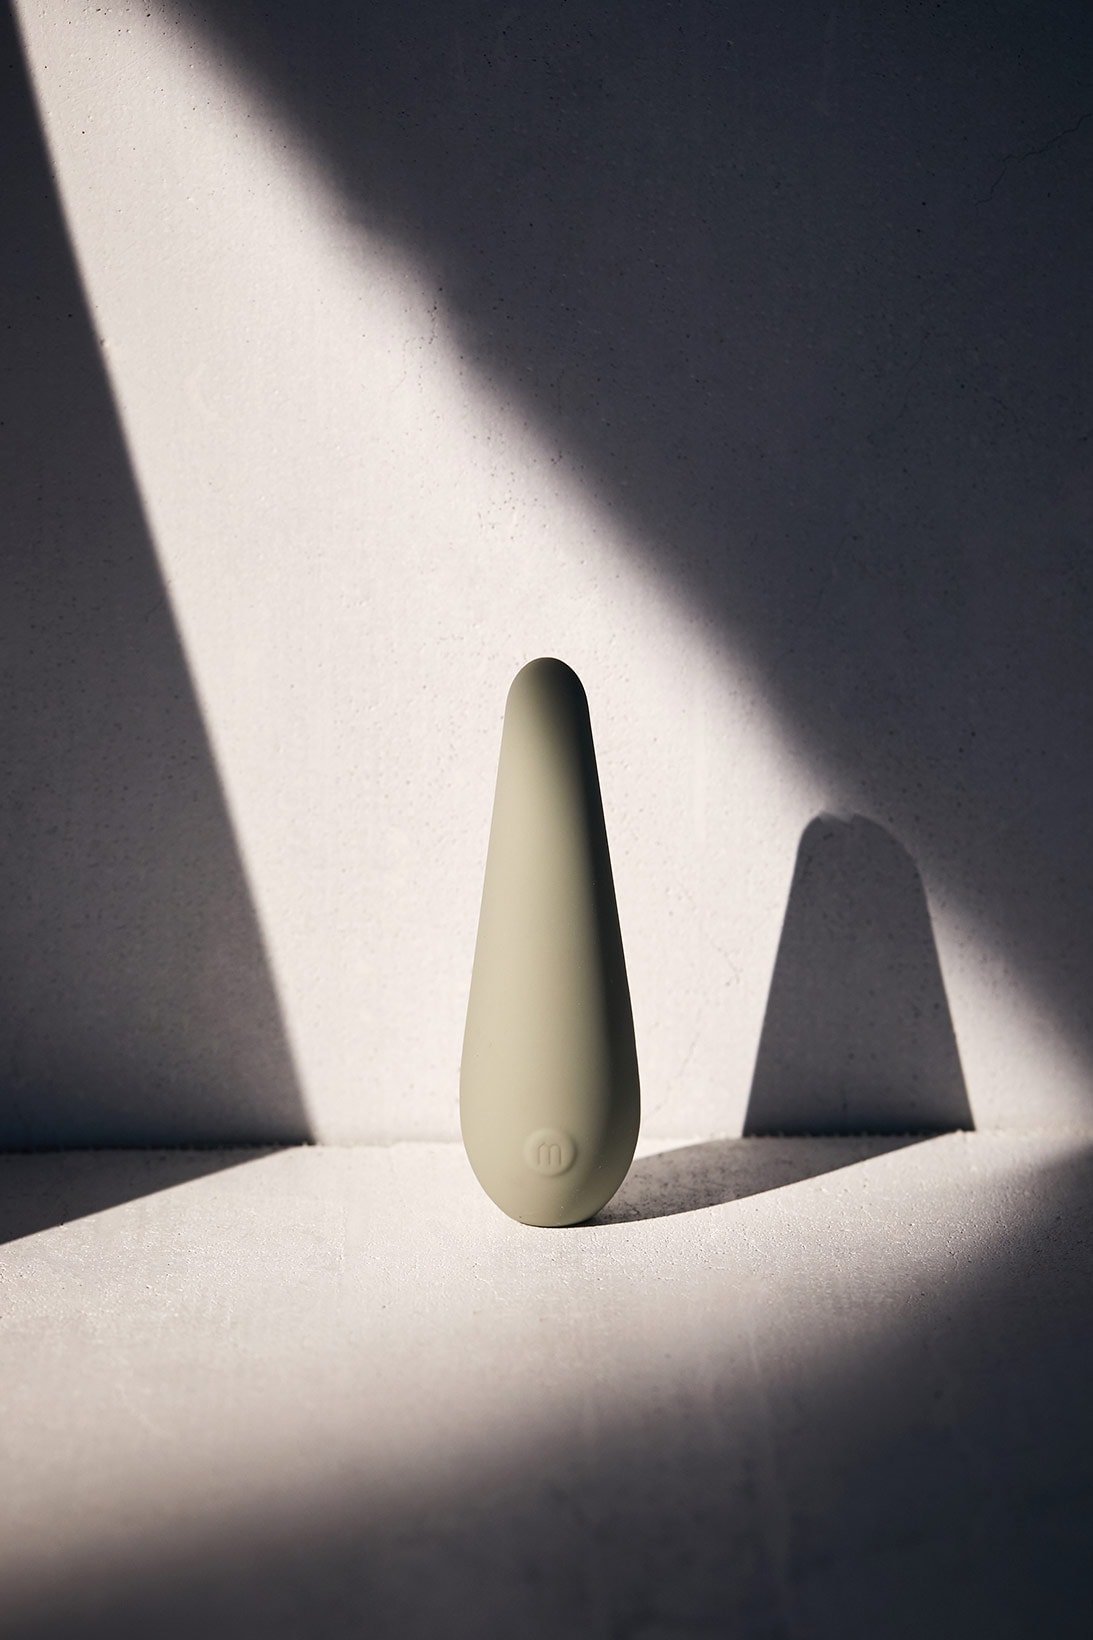 maude urban outfitters vibe vibrator collaboration new mint green colorway sex toy